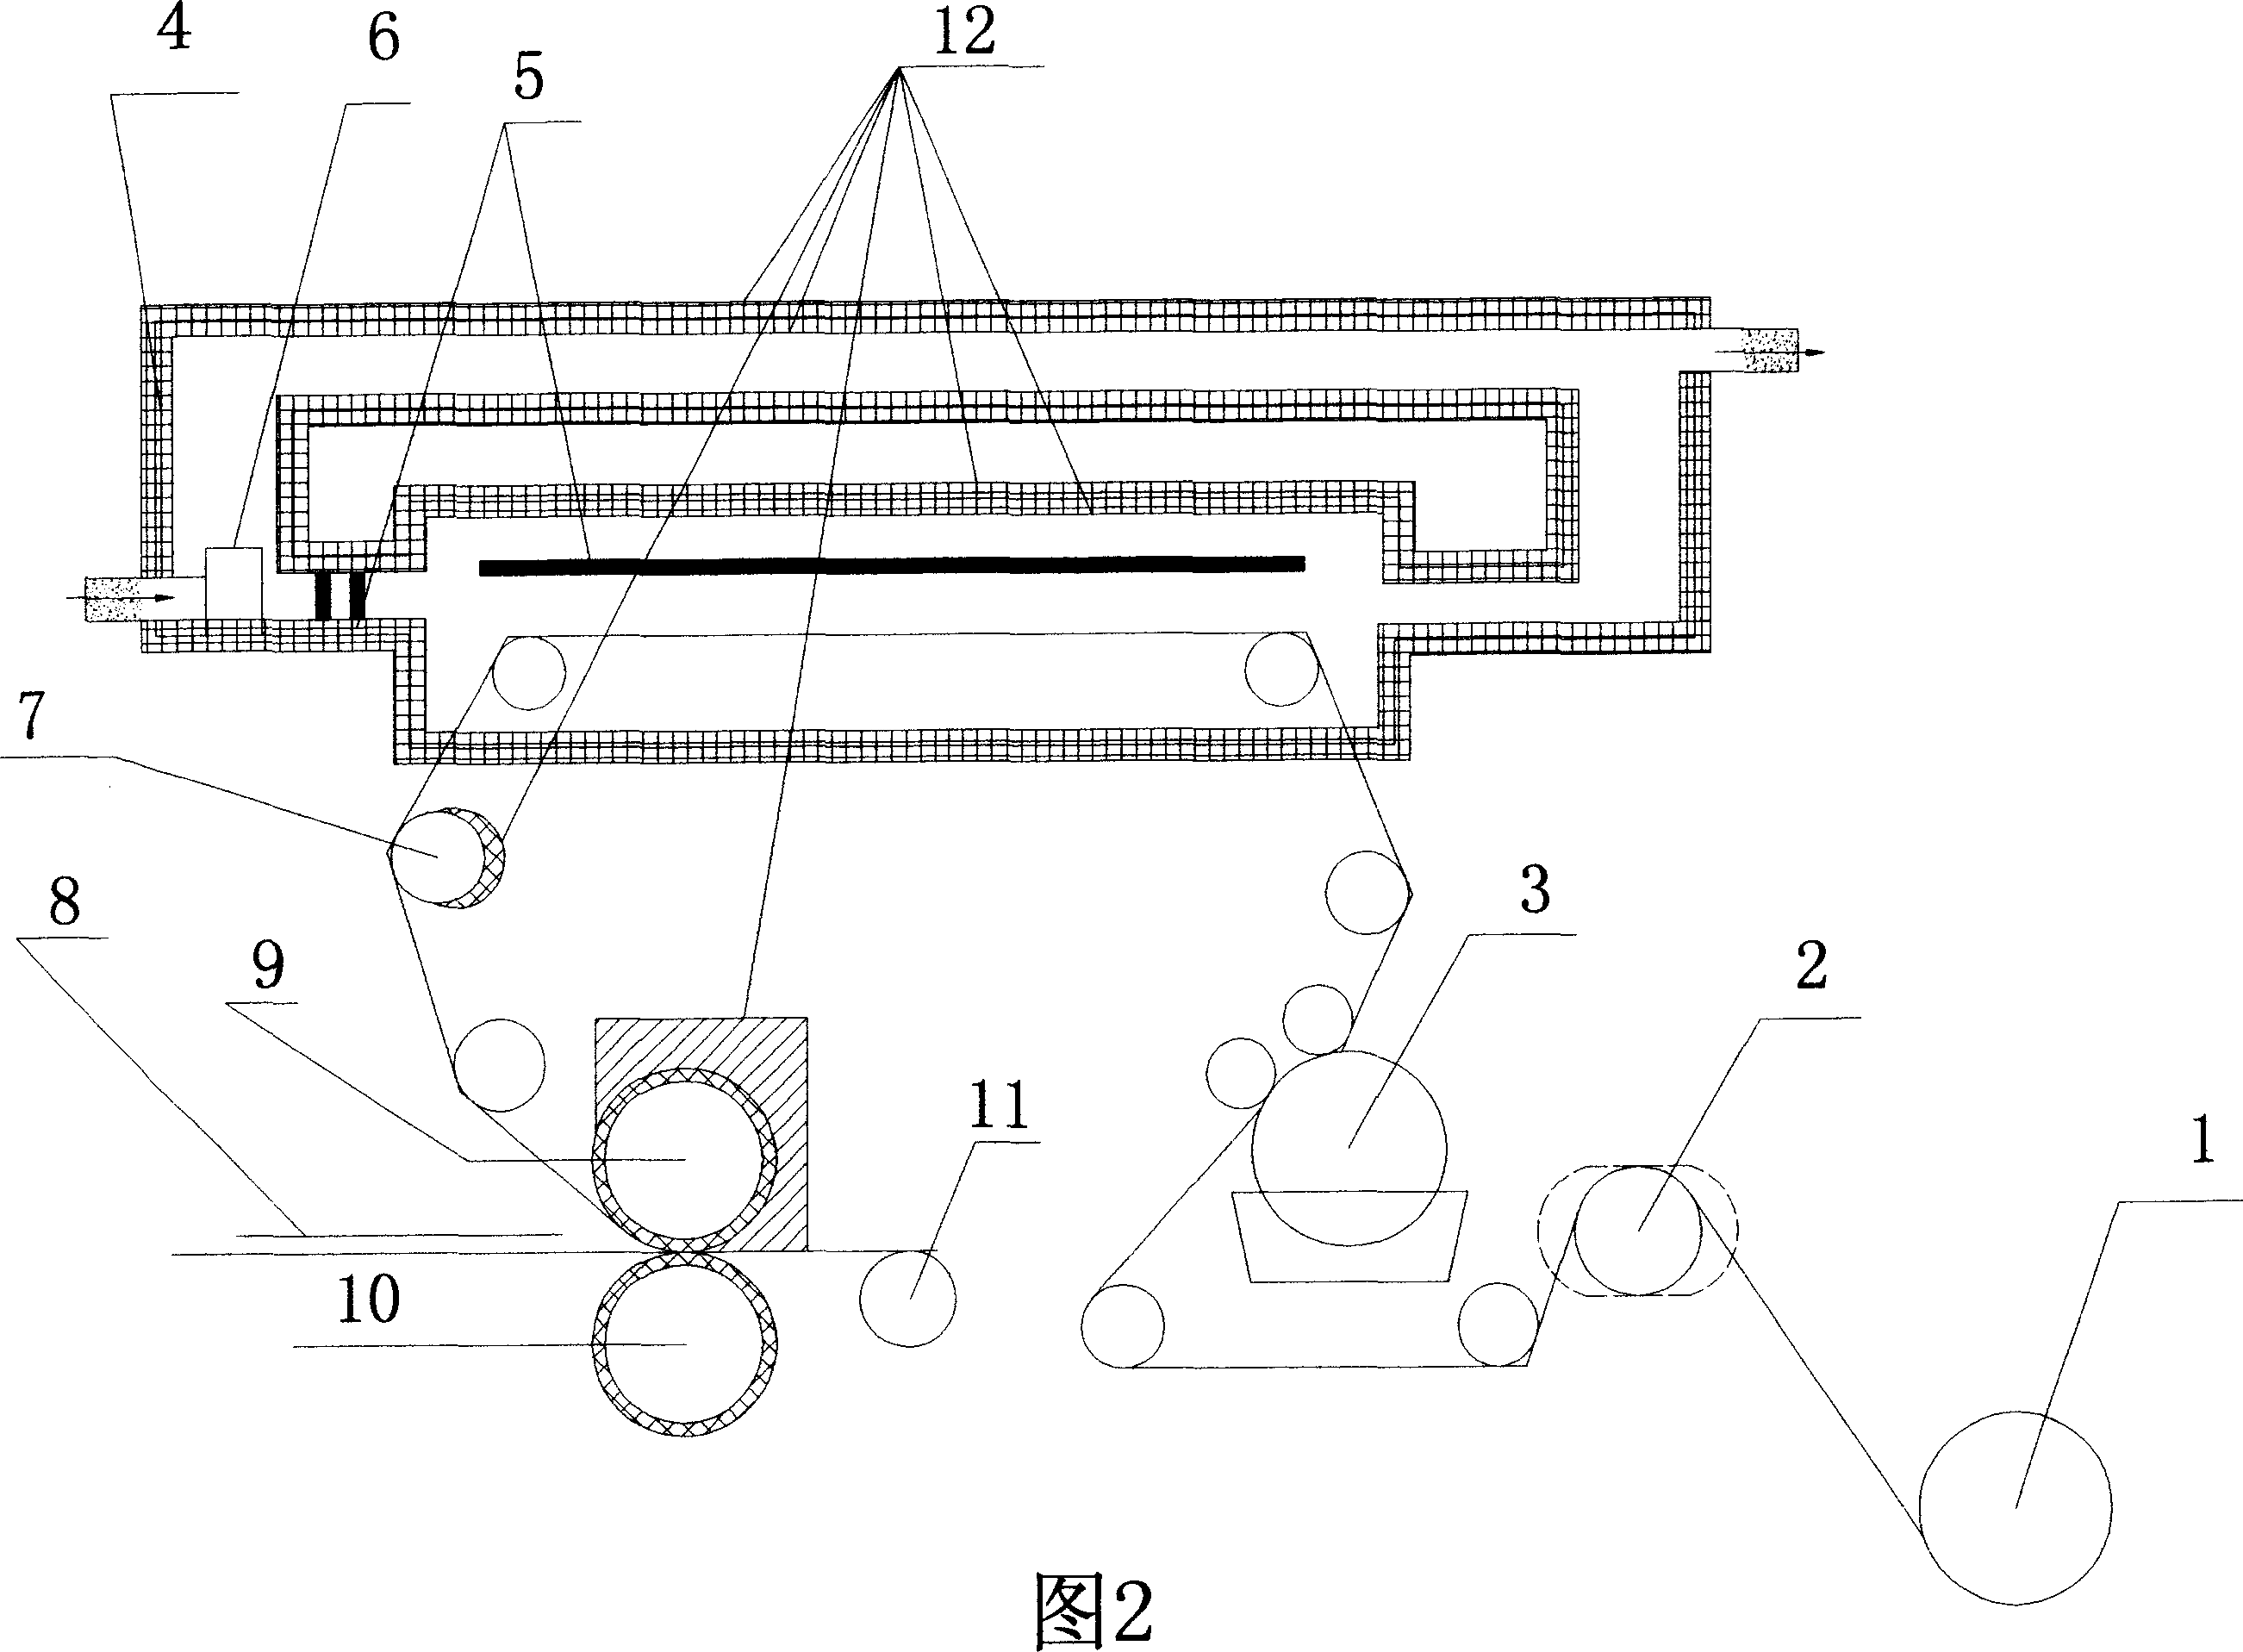 Hot pressing device for jointing overlay film dryed by drying tunnel, and method for gluing overlay film by painting water